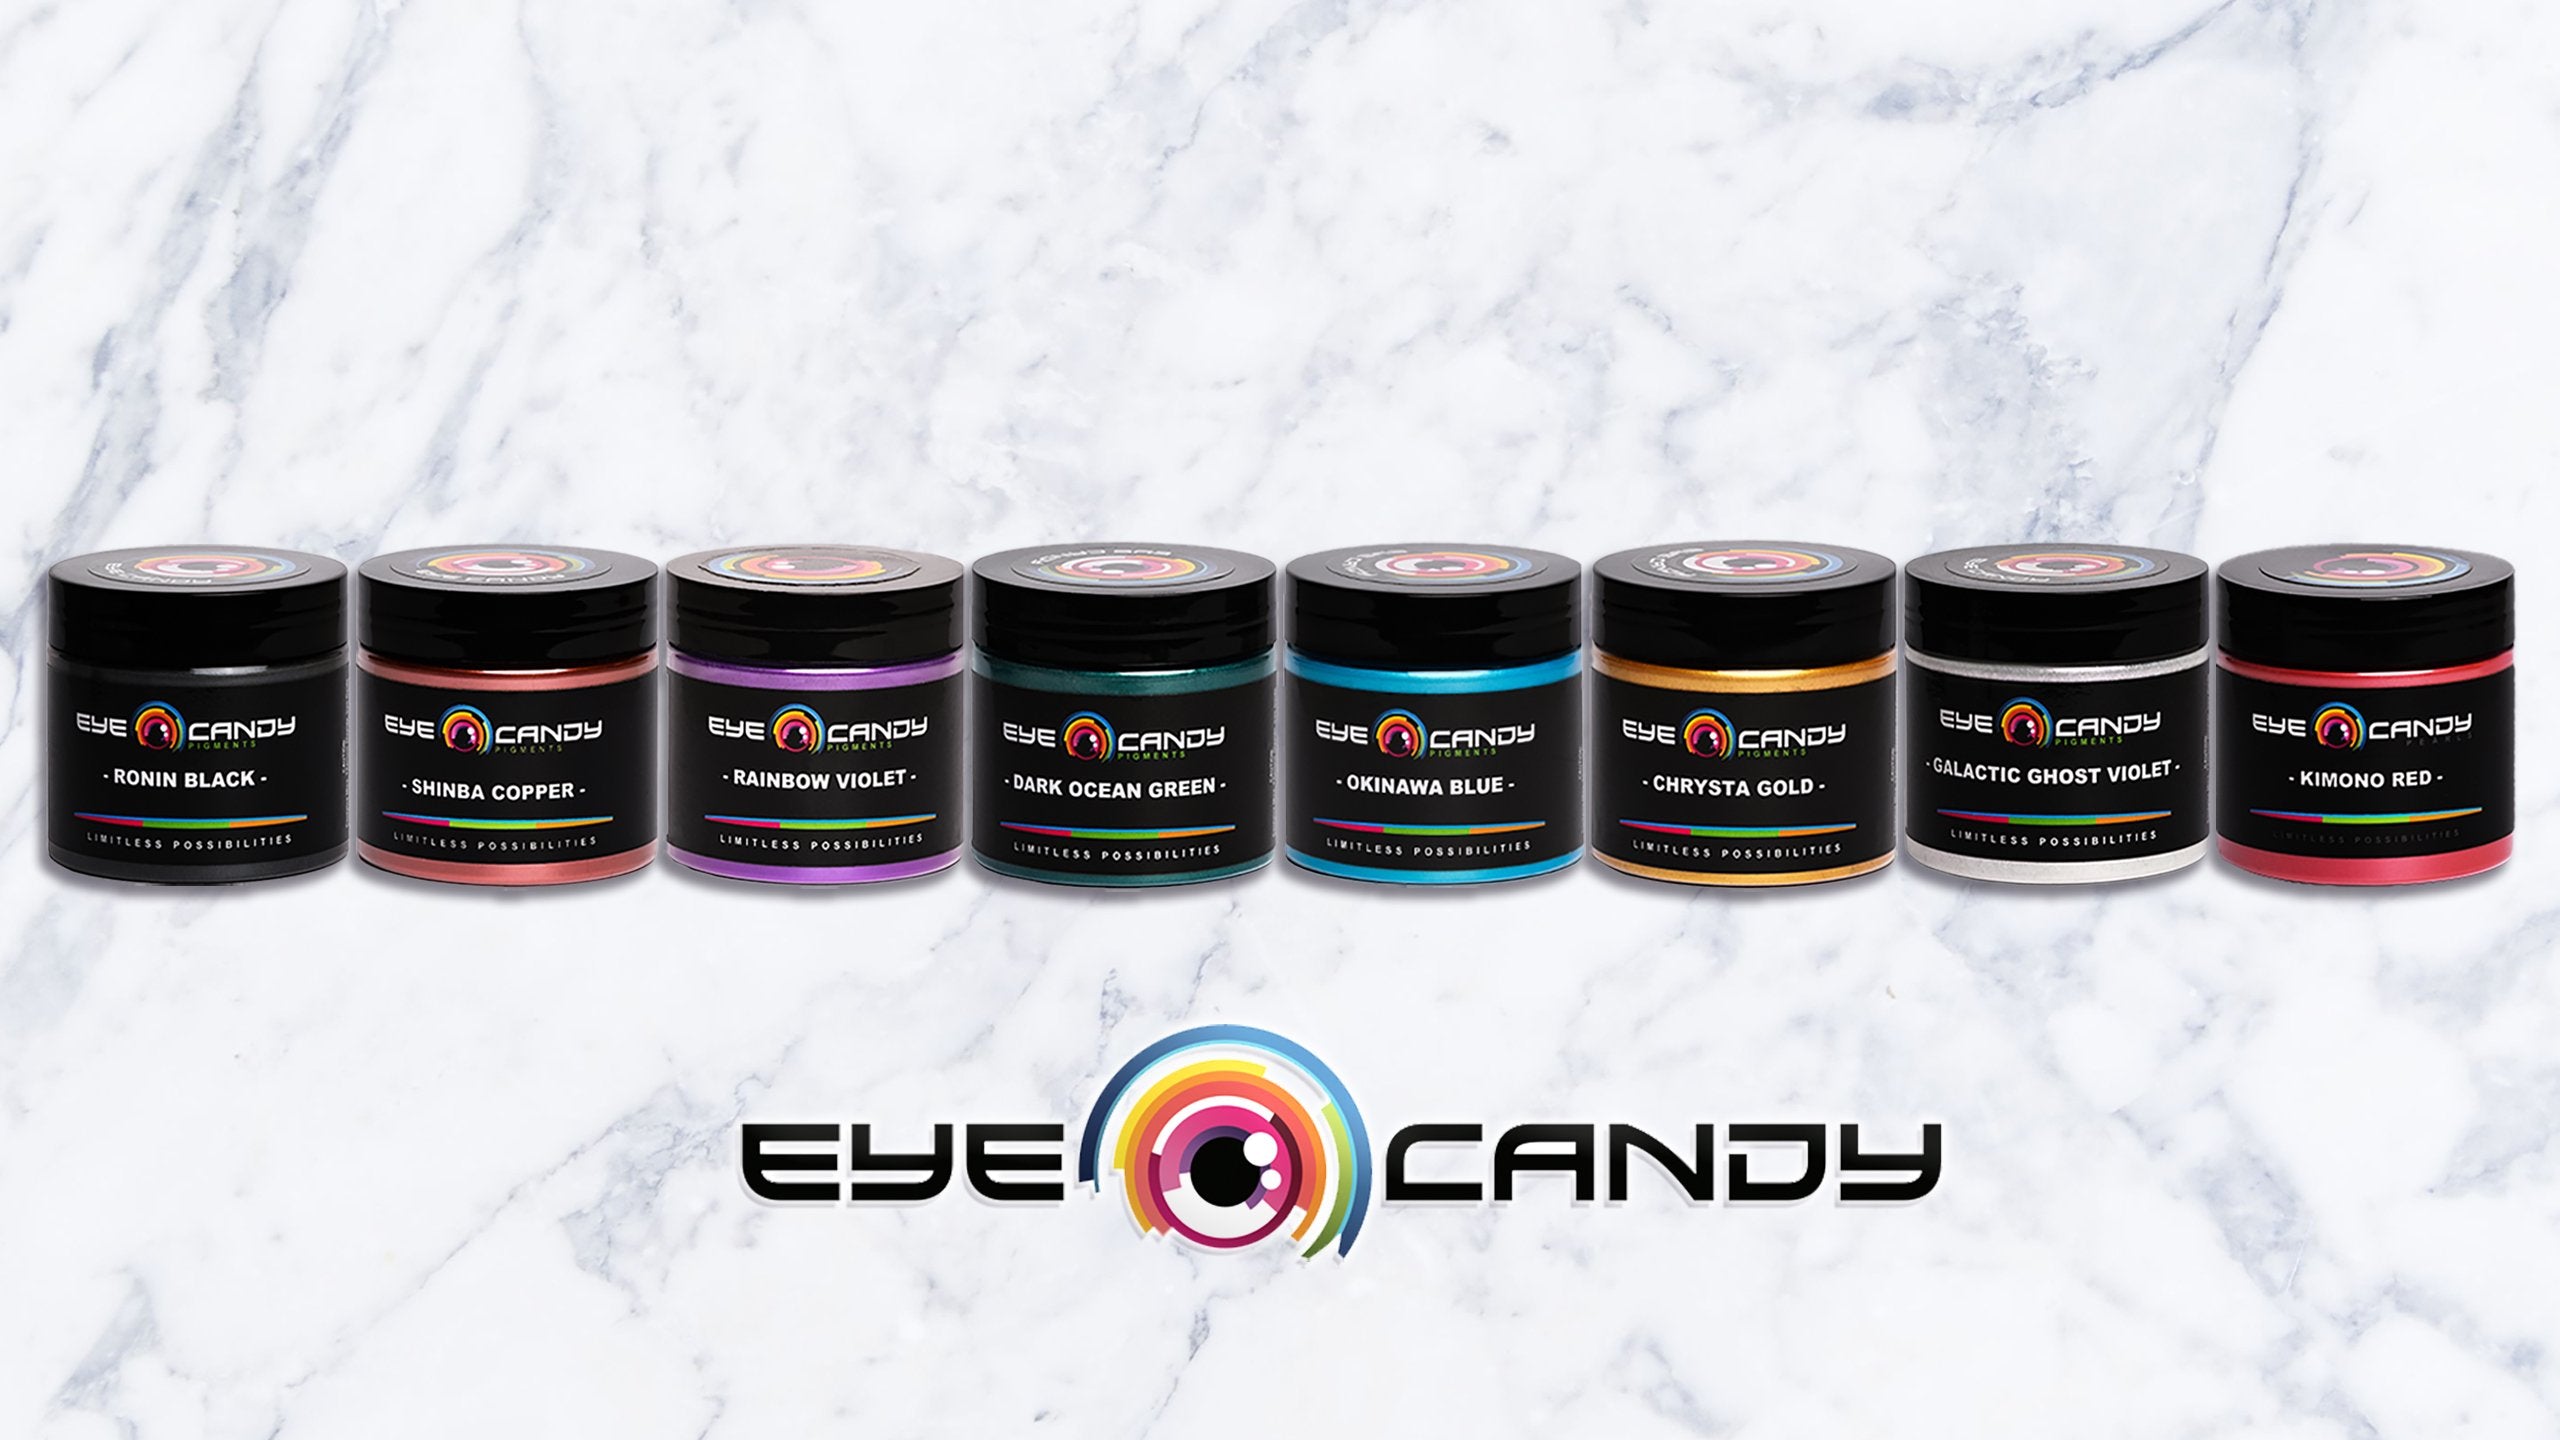 Eye Candy Pigments - A dusting of Ultra flake & Mujina Ultra Shift pearl.  Order yours. www.eyecandycustomzus.com Installer: @secondskindip Owner:  @sicwithdadreads #eyecandycustomz #eyecandycustomzus #eyecandycustomzpearls  #eyecandycustomz #pearls